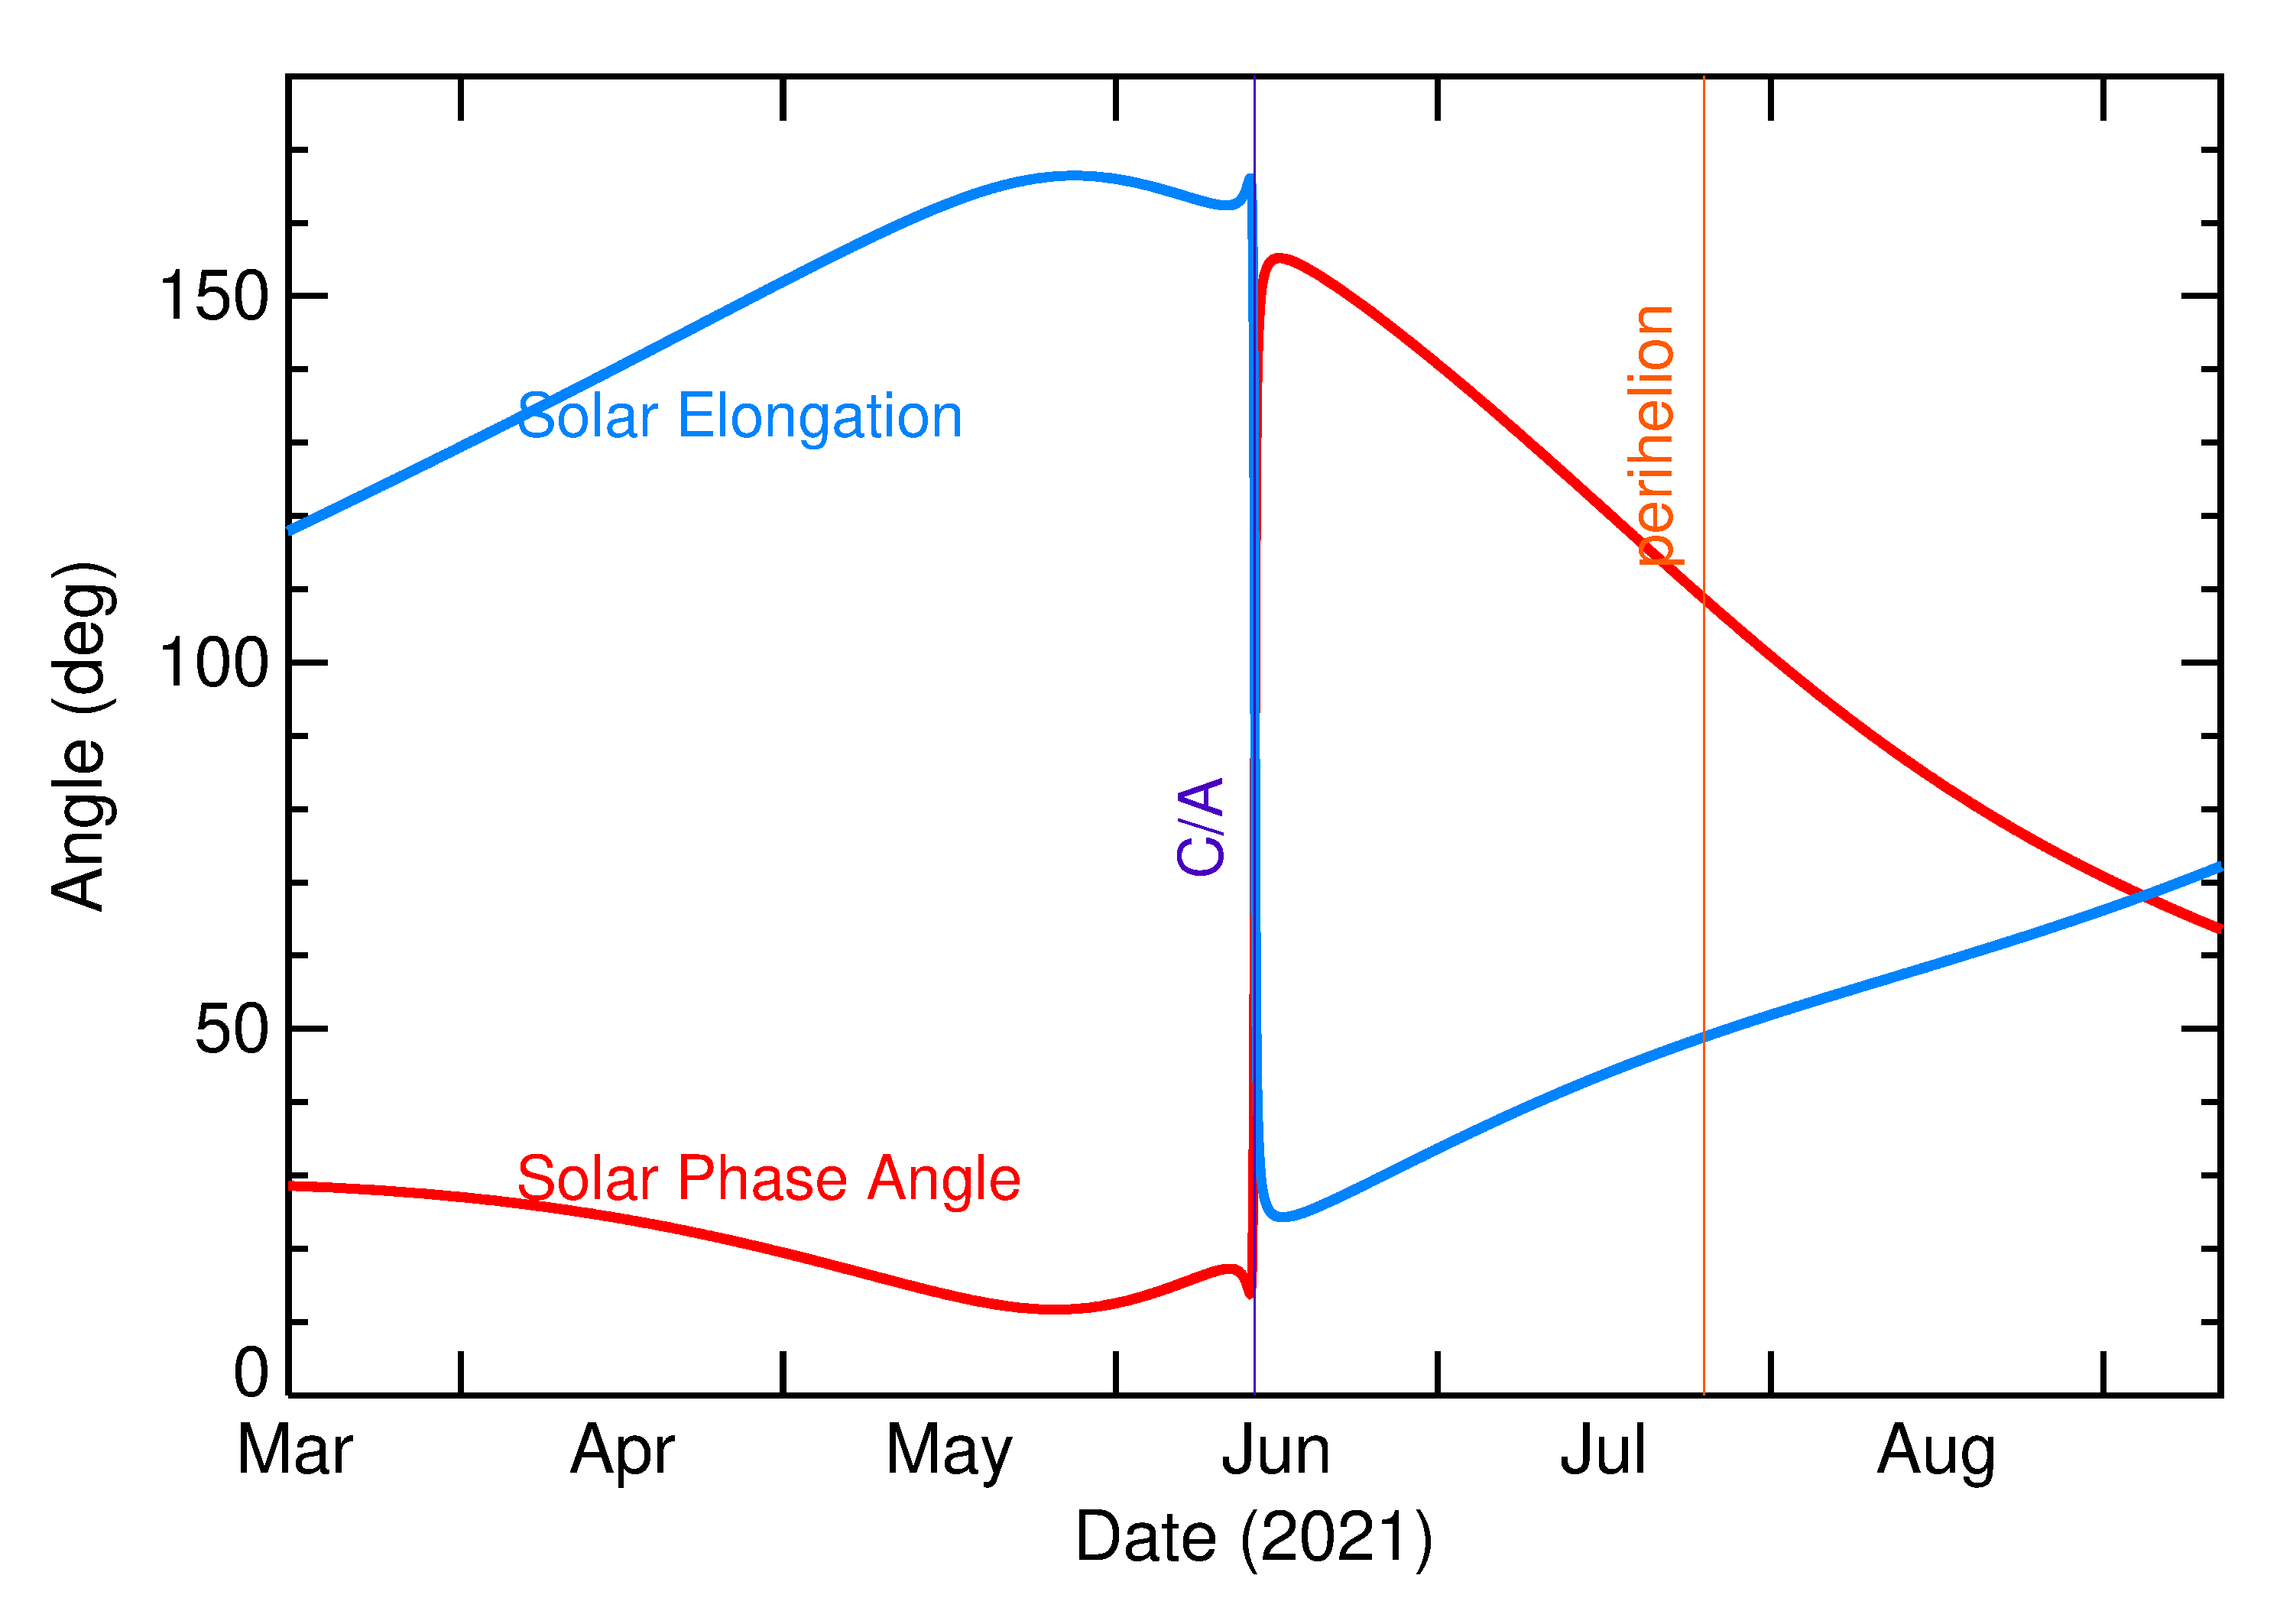 Solar Elongation and Solar Phase Angle of 2021 LG5 in the months around closest approach